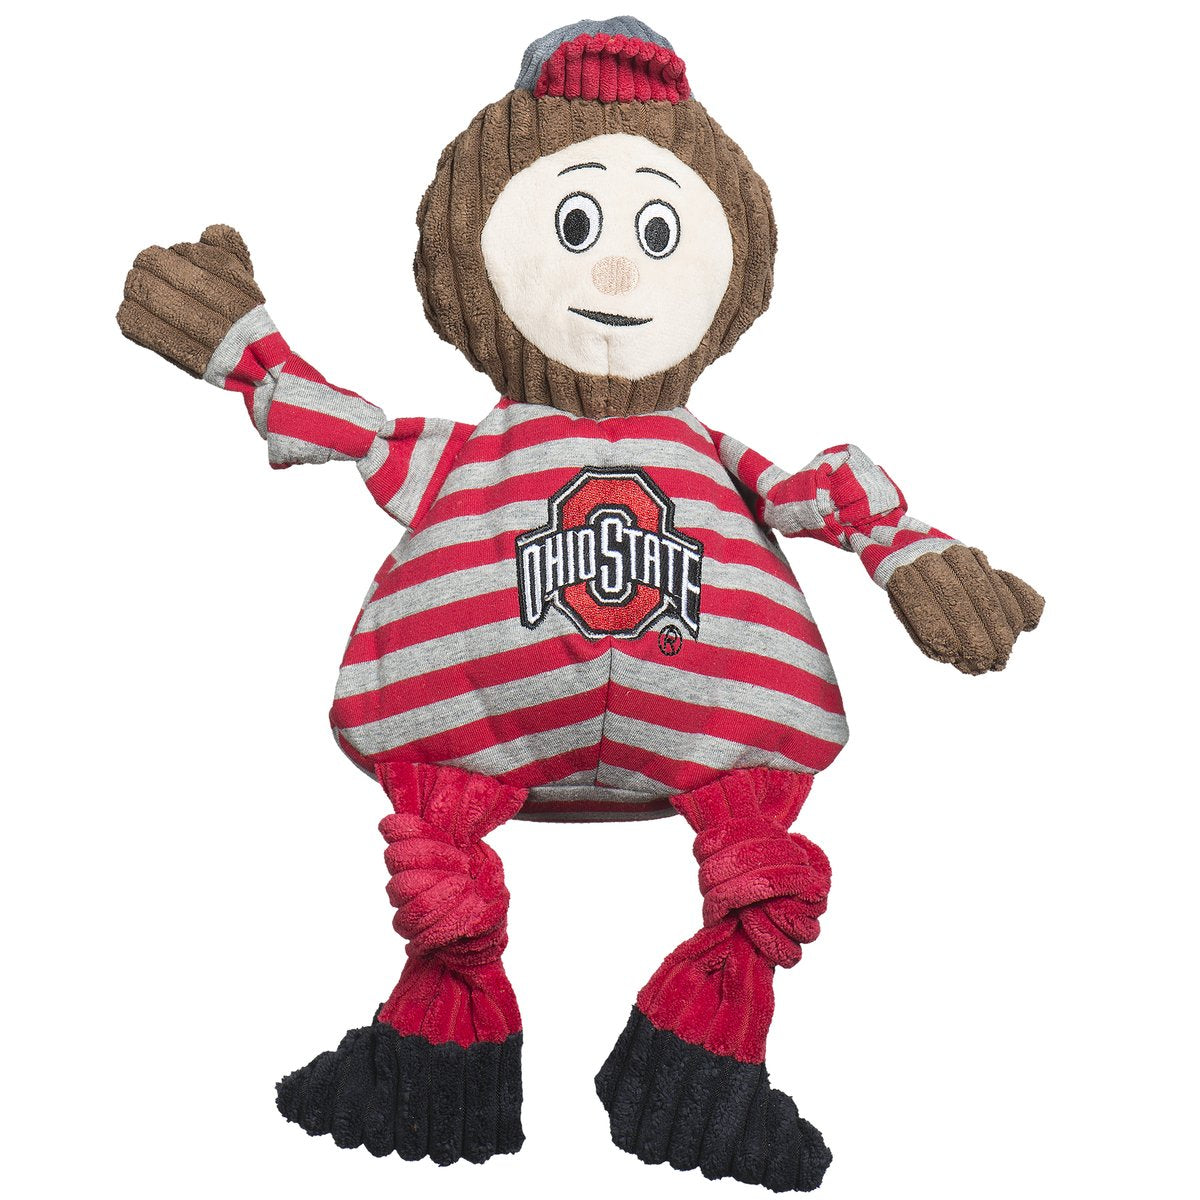 HuggleHounds Knottie Officially Licensed College Mascot Durable Squeaky Plush Dog Toy, Ohio State Buckeyes